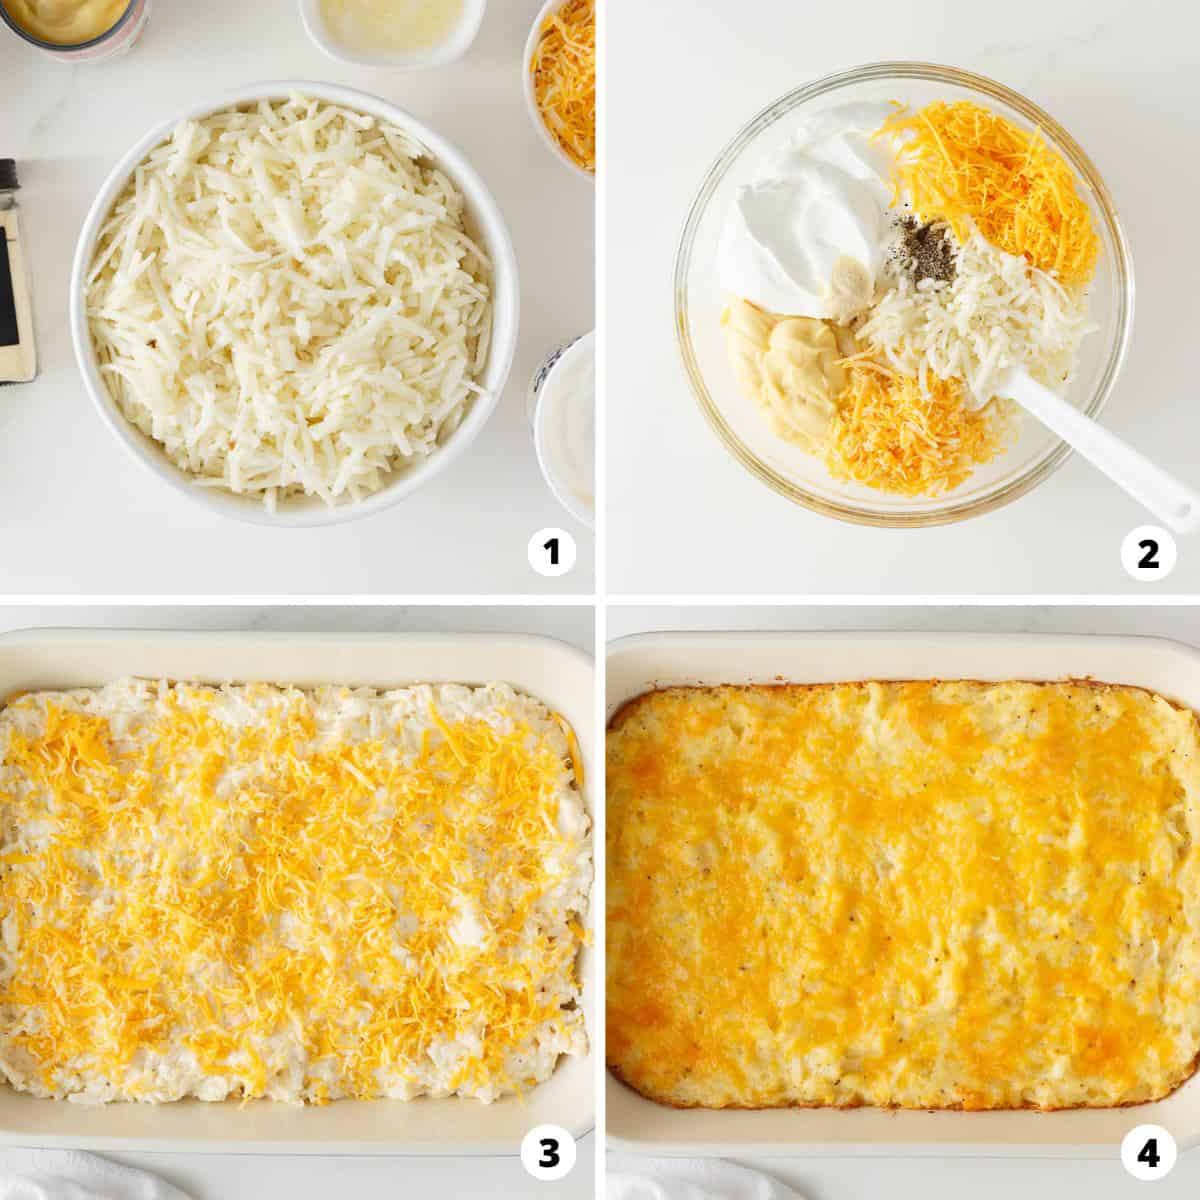 Showing how to make hashbrown casserole in a 4 step collage.